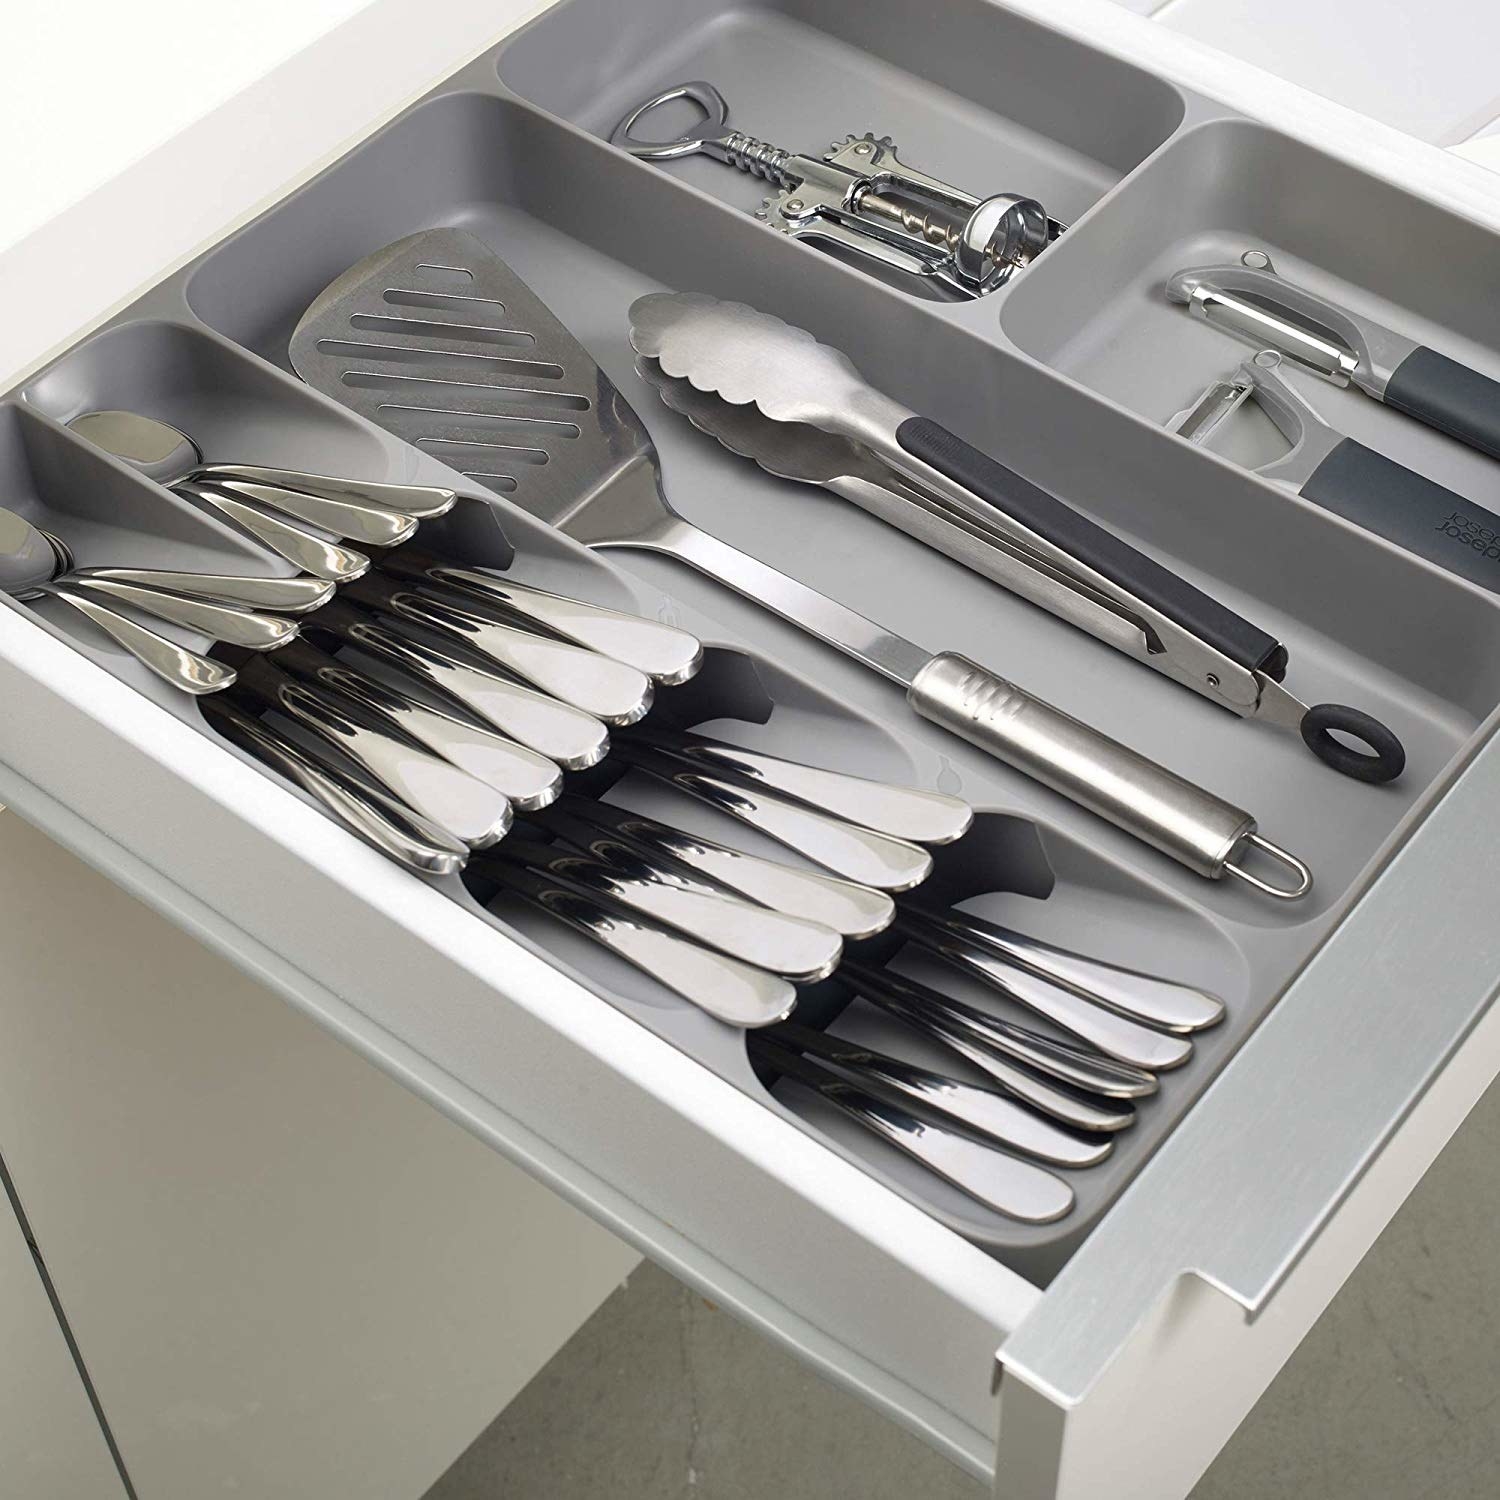 The tray with slanted slots to separate the utensils